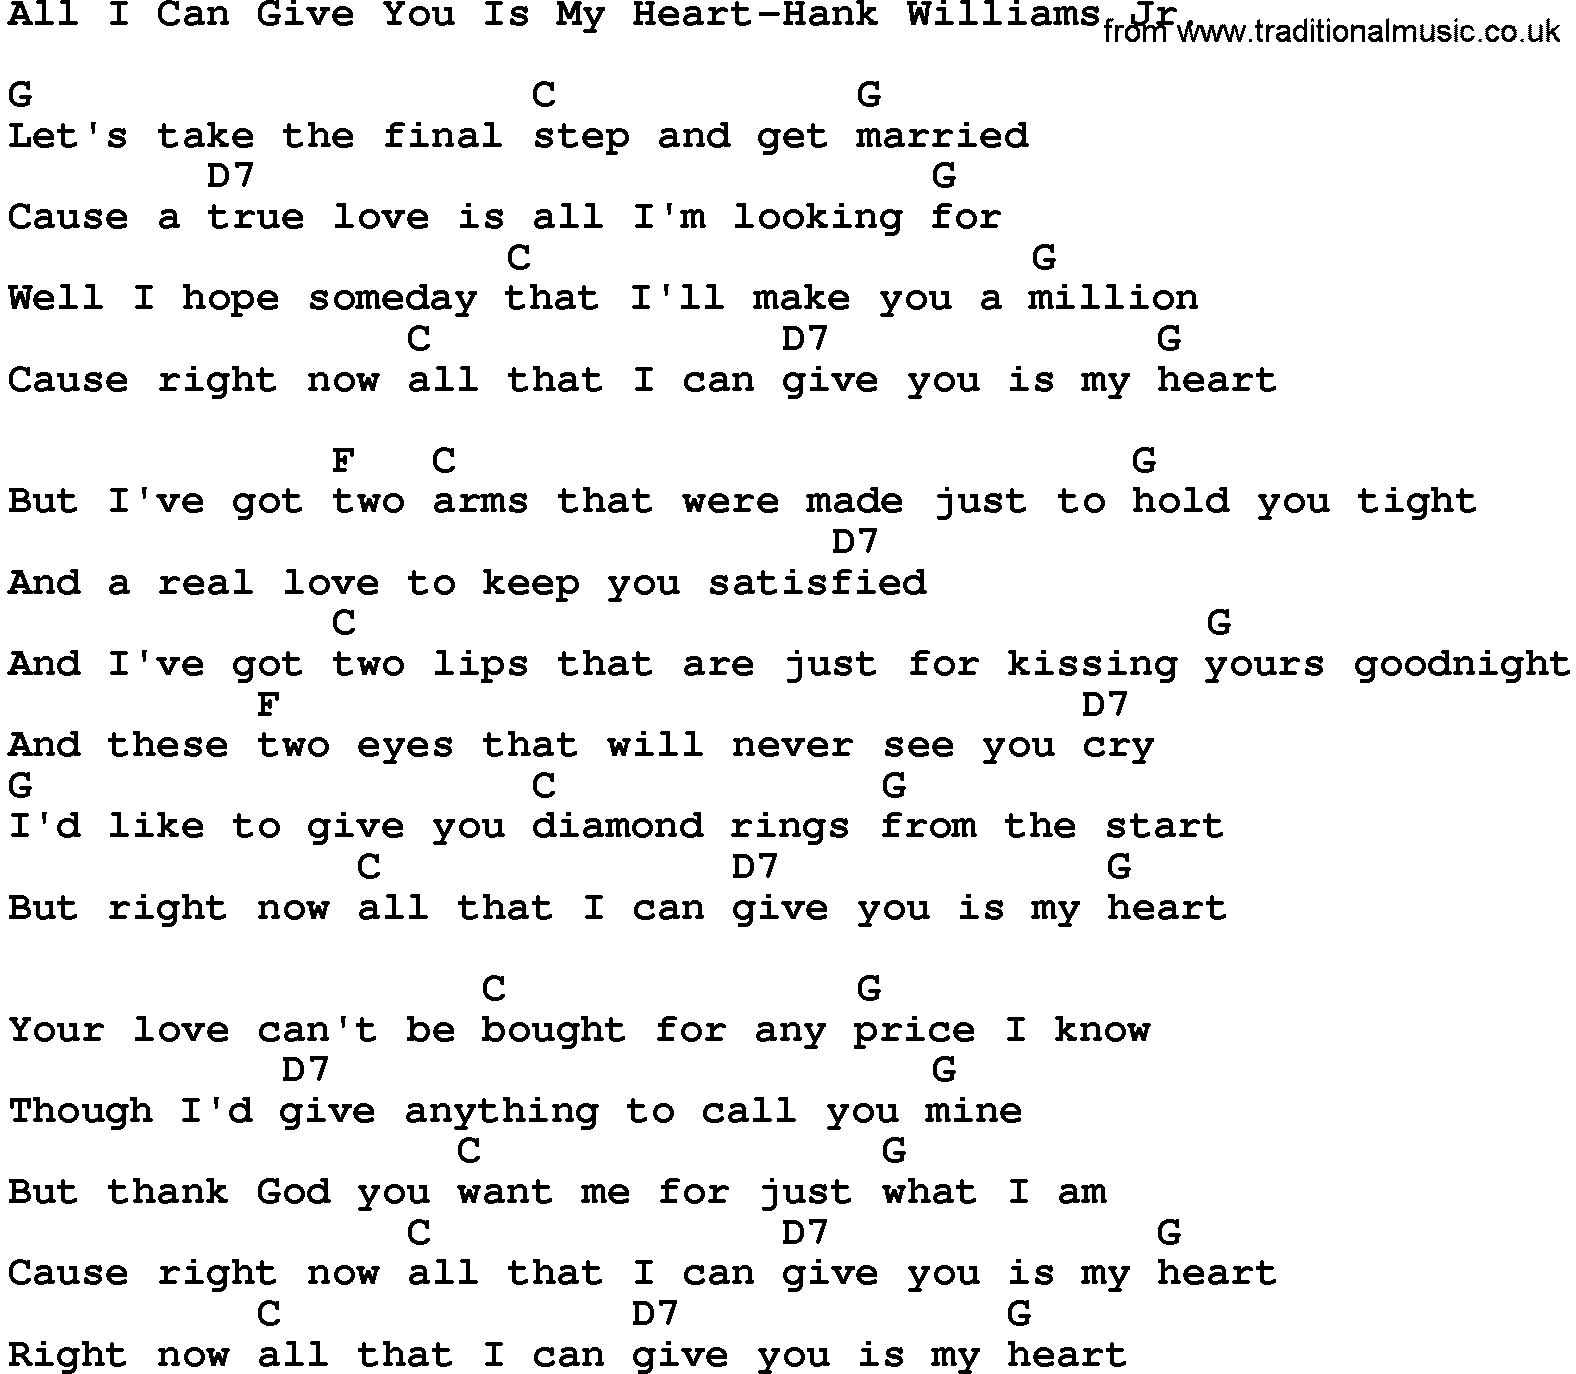 Country music song: All I Can Give You Is My Heart-Hank Williams Jr lyrics and chords